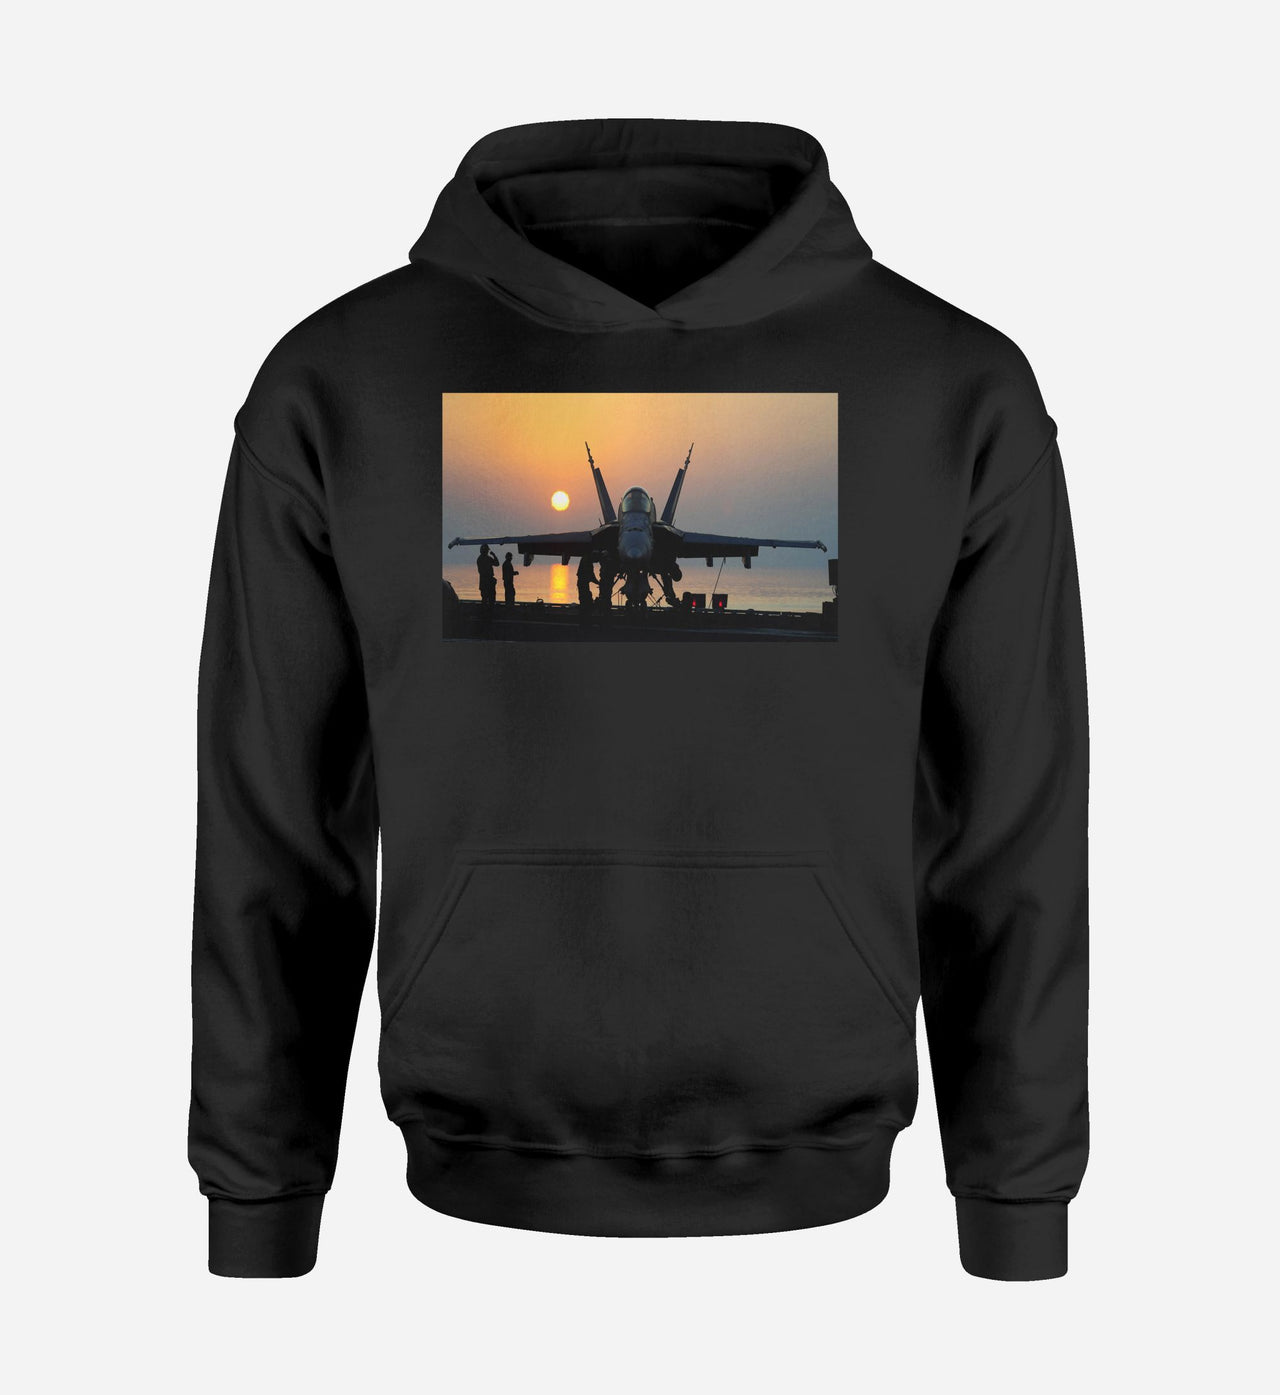 Military Jet During Sunset Designed Hoodies